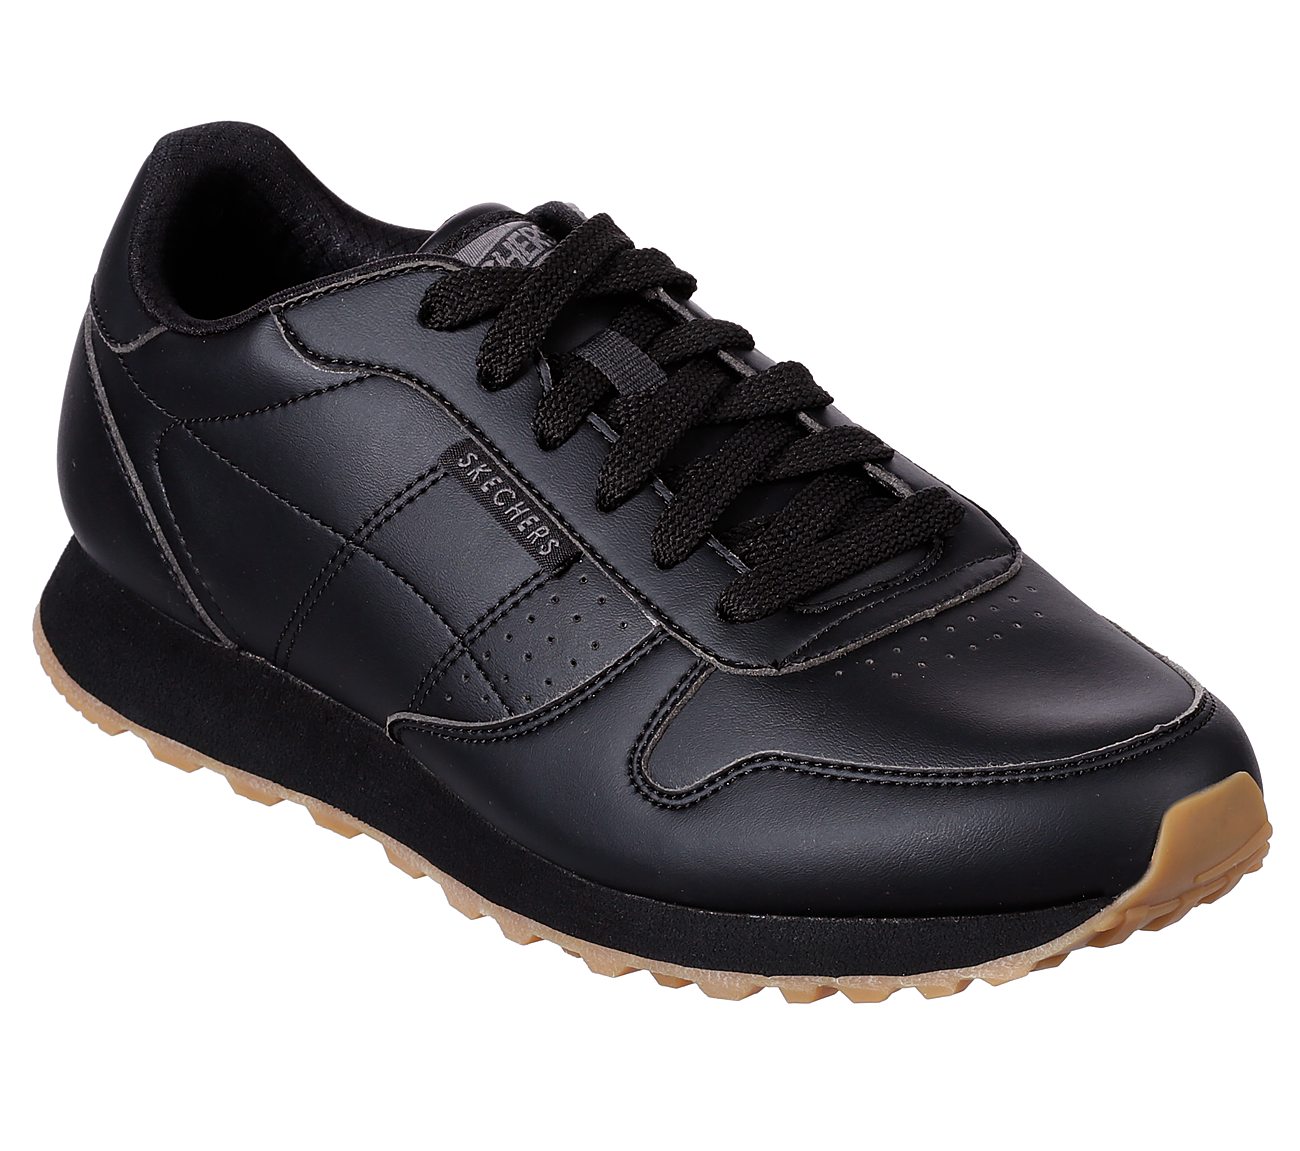 Old Style Skechers Shoes Online Sale 